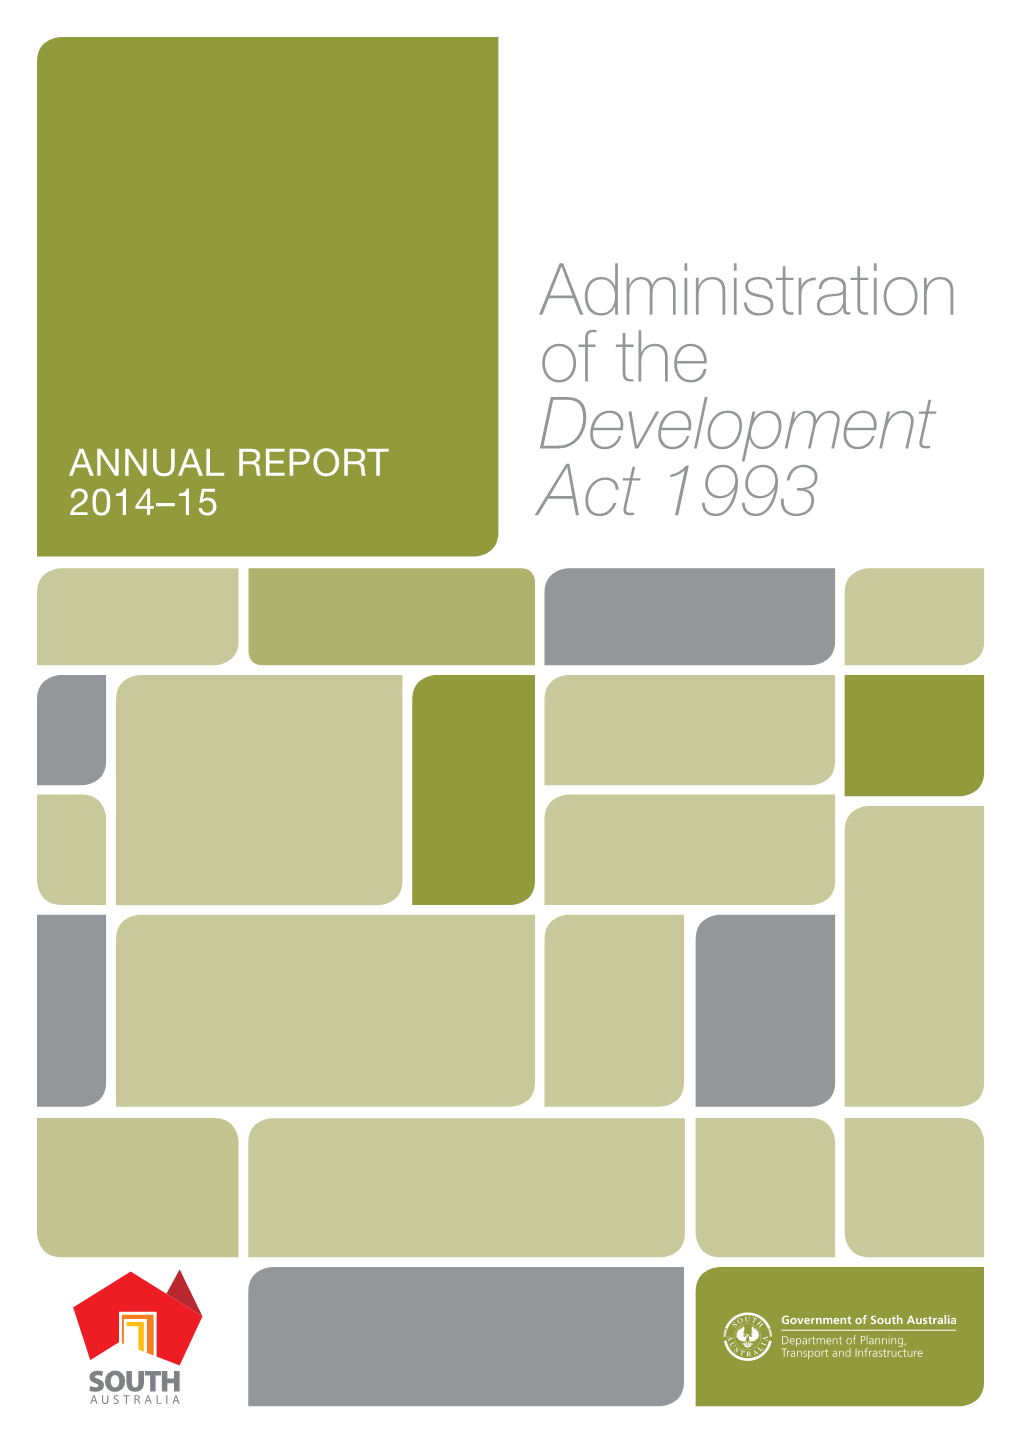 Annual Report on the Administration of the Development Act 1993, 2014-15 1